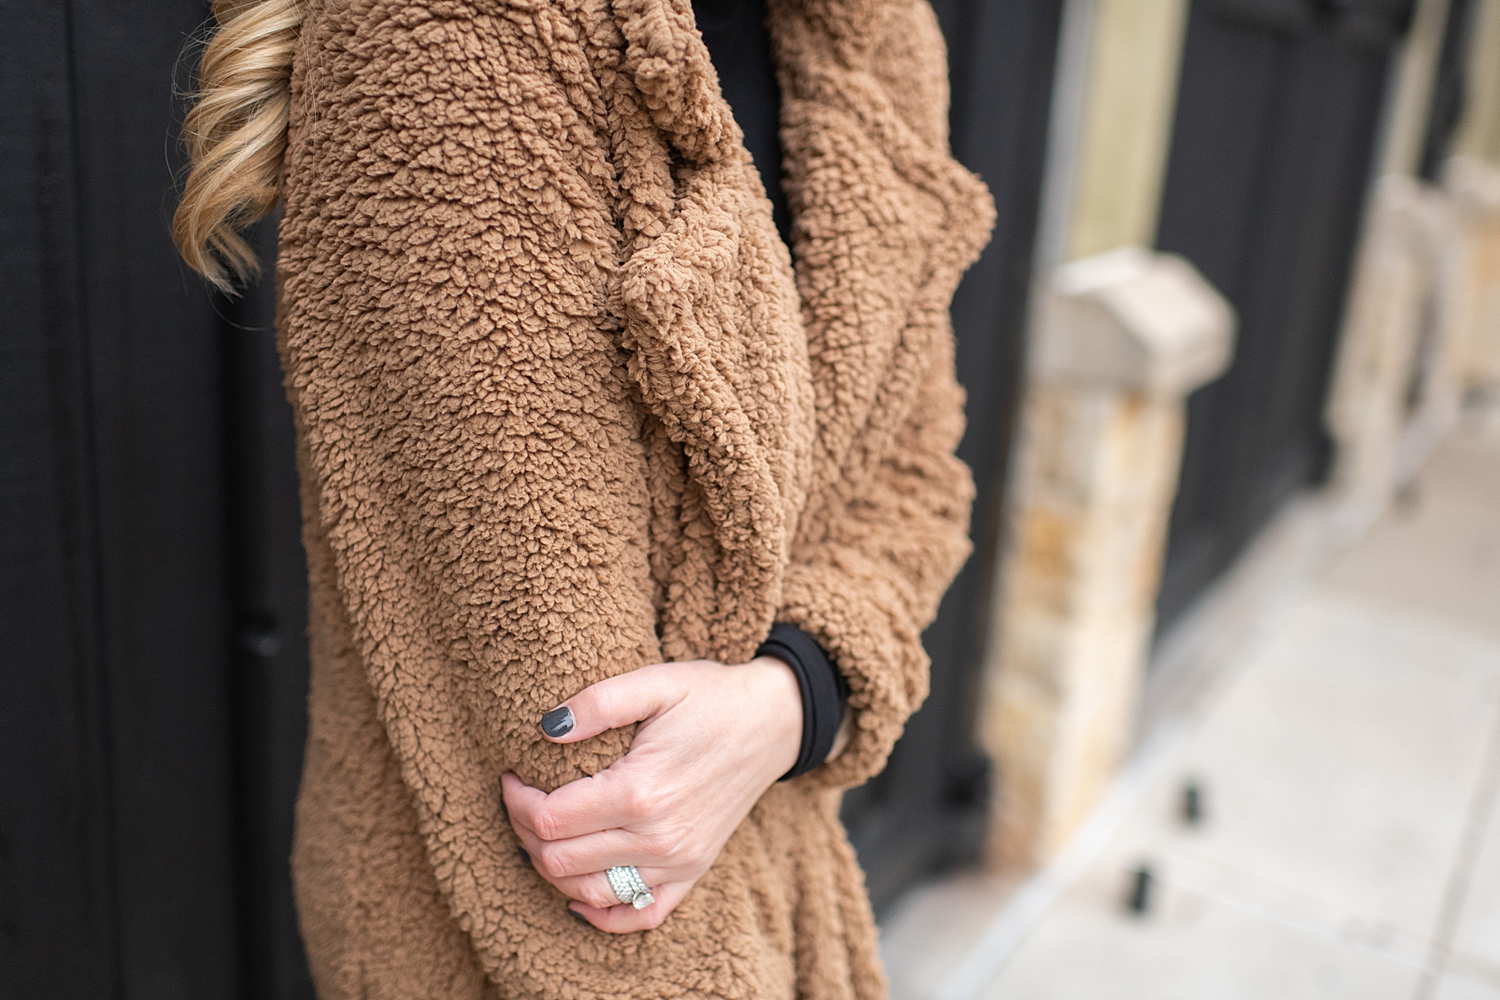 Fashion Accessories Gift Ideas with Sole Society featured by top Houston fashion blogger, Fancy Ashley: image of a woman wearing a Faux fur coat, Sole Society booties, Sole Society leopard clutch, Social Threads faux leather leggings and Social Threads black turtleneck